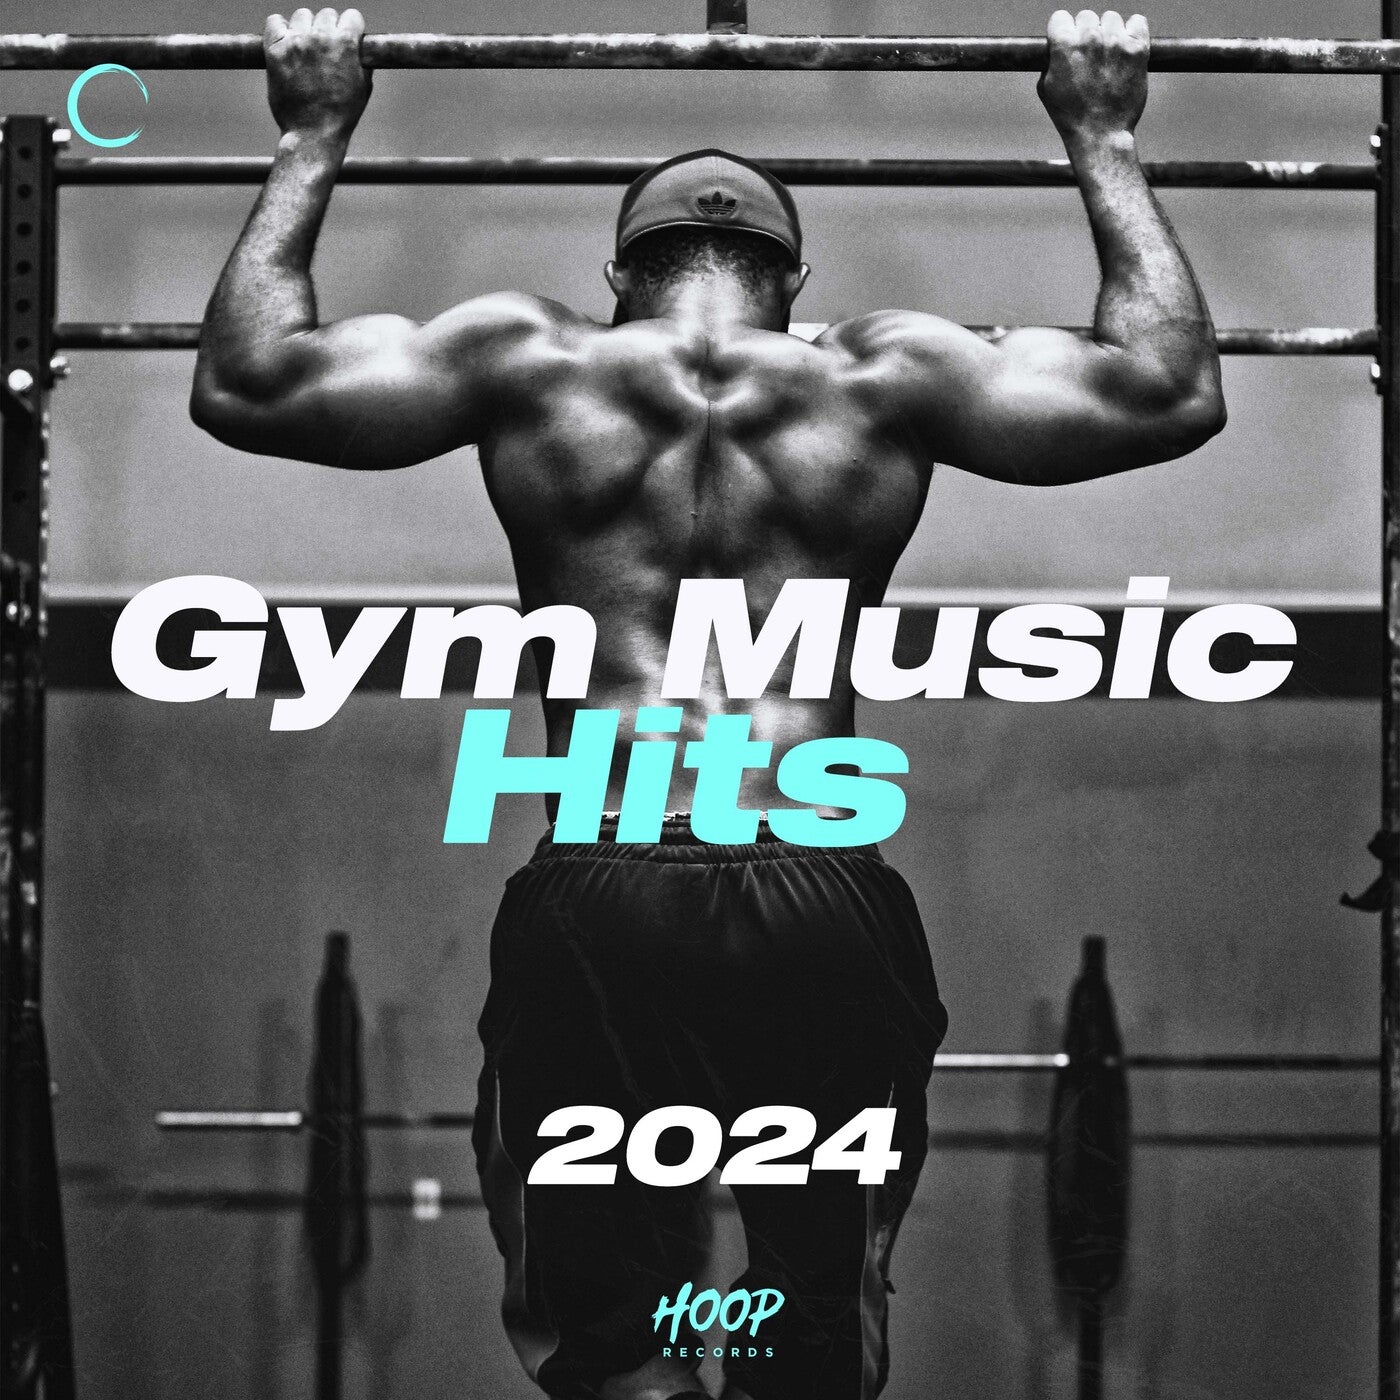 Gym Music Hits 2024: The Best Music Hits for Your Gym Moment